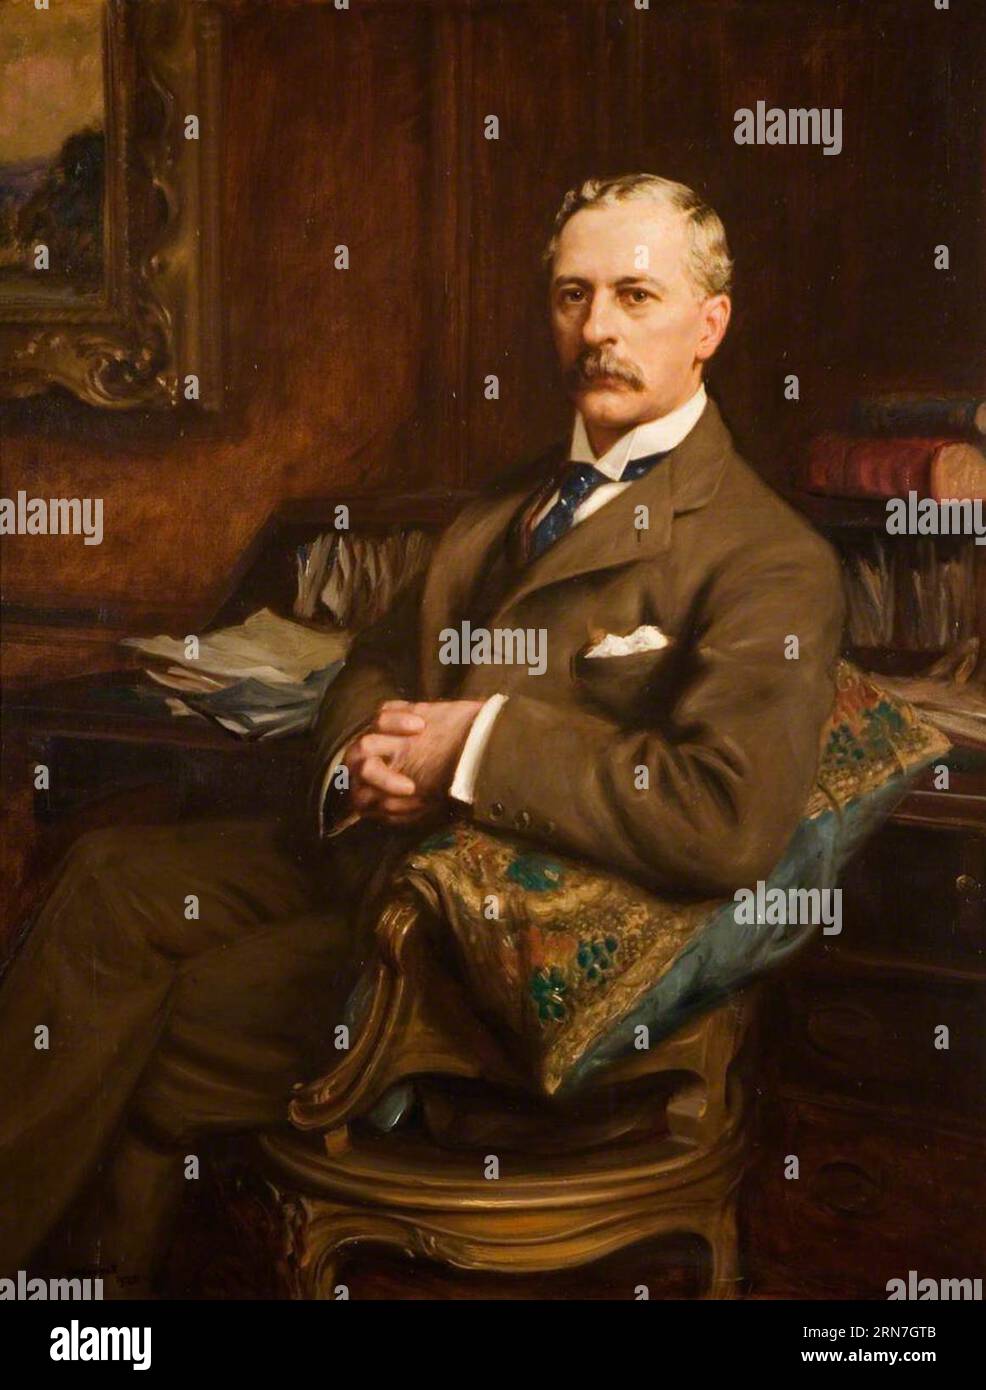 Thomas Francis Anson, Baron Soberton, Viscount Anson of Shugborough and Orgreave, Earl of Lichfield 1920 by Frank Moss Bennett Stock Photo